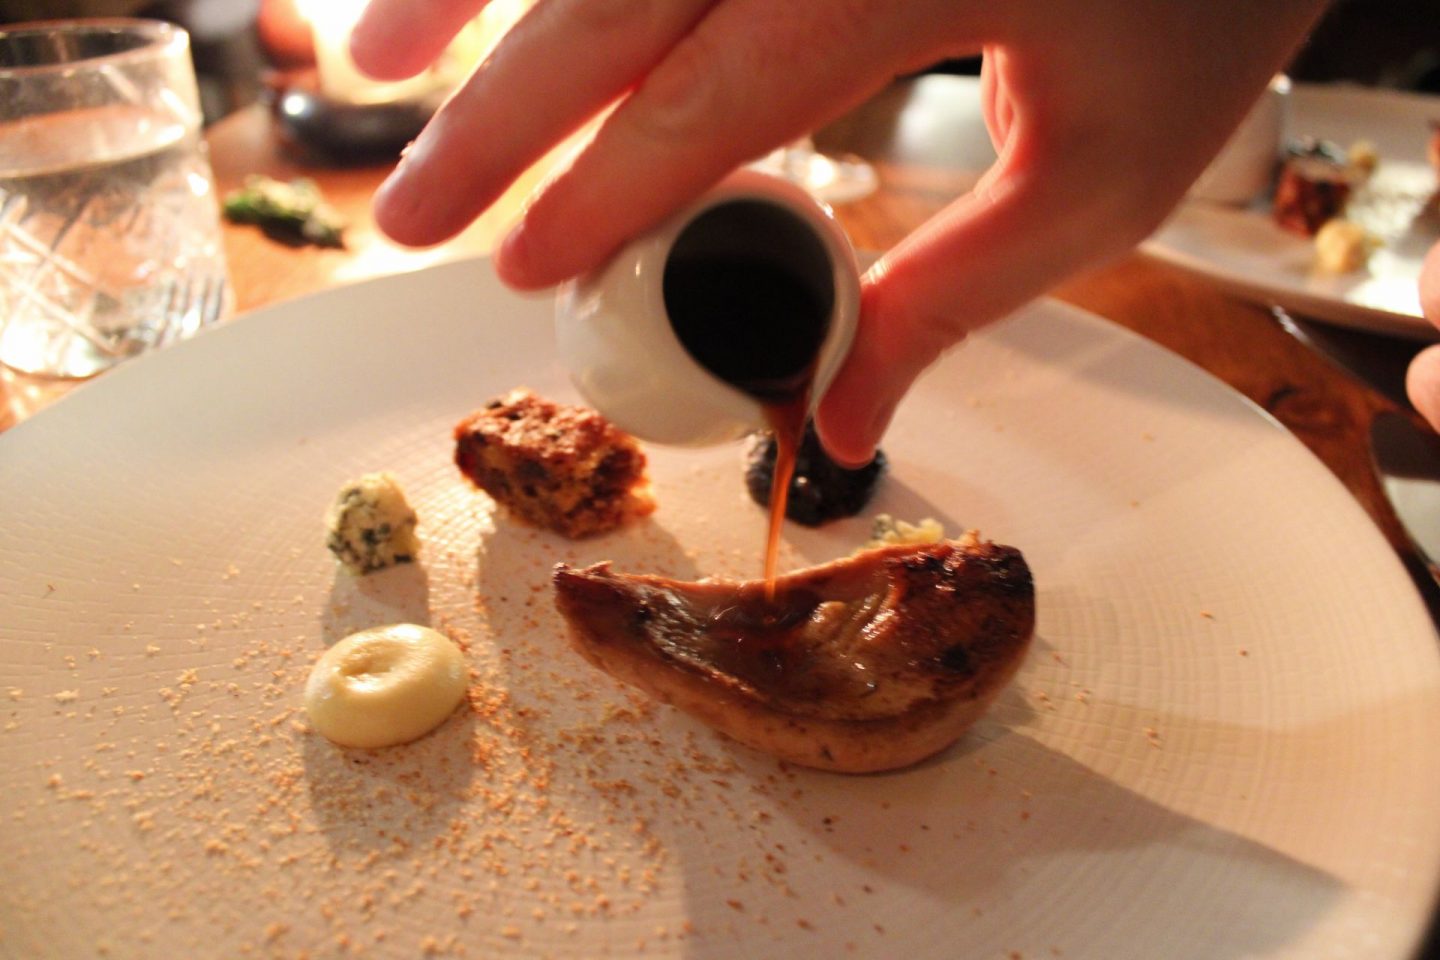 The Star Inn at Harome: gravy being poured onto a small partridge breast